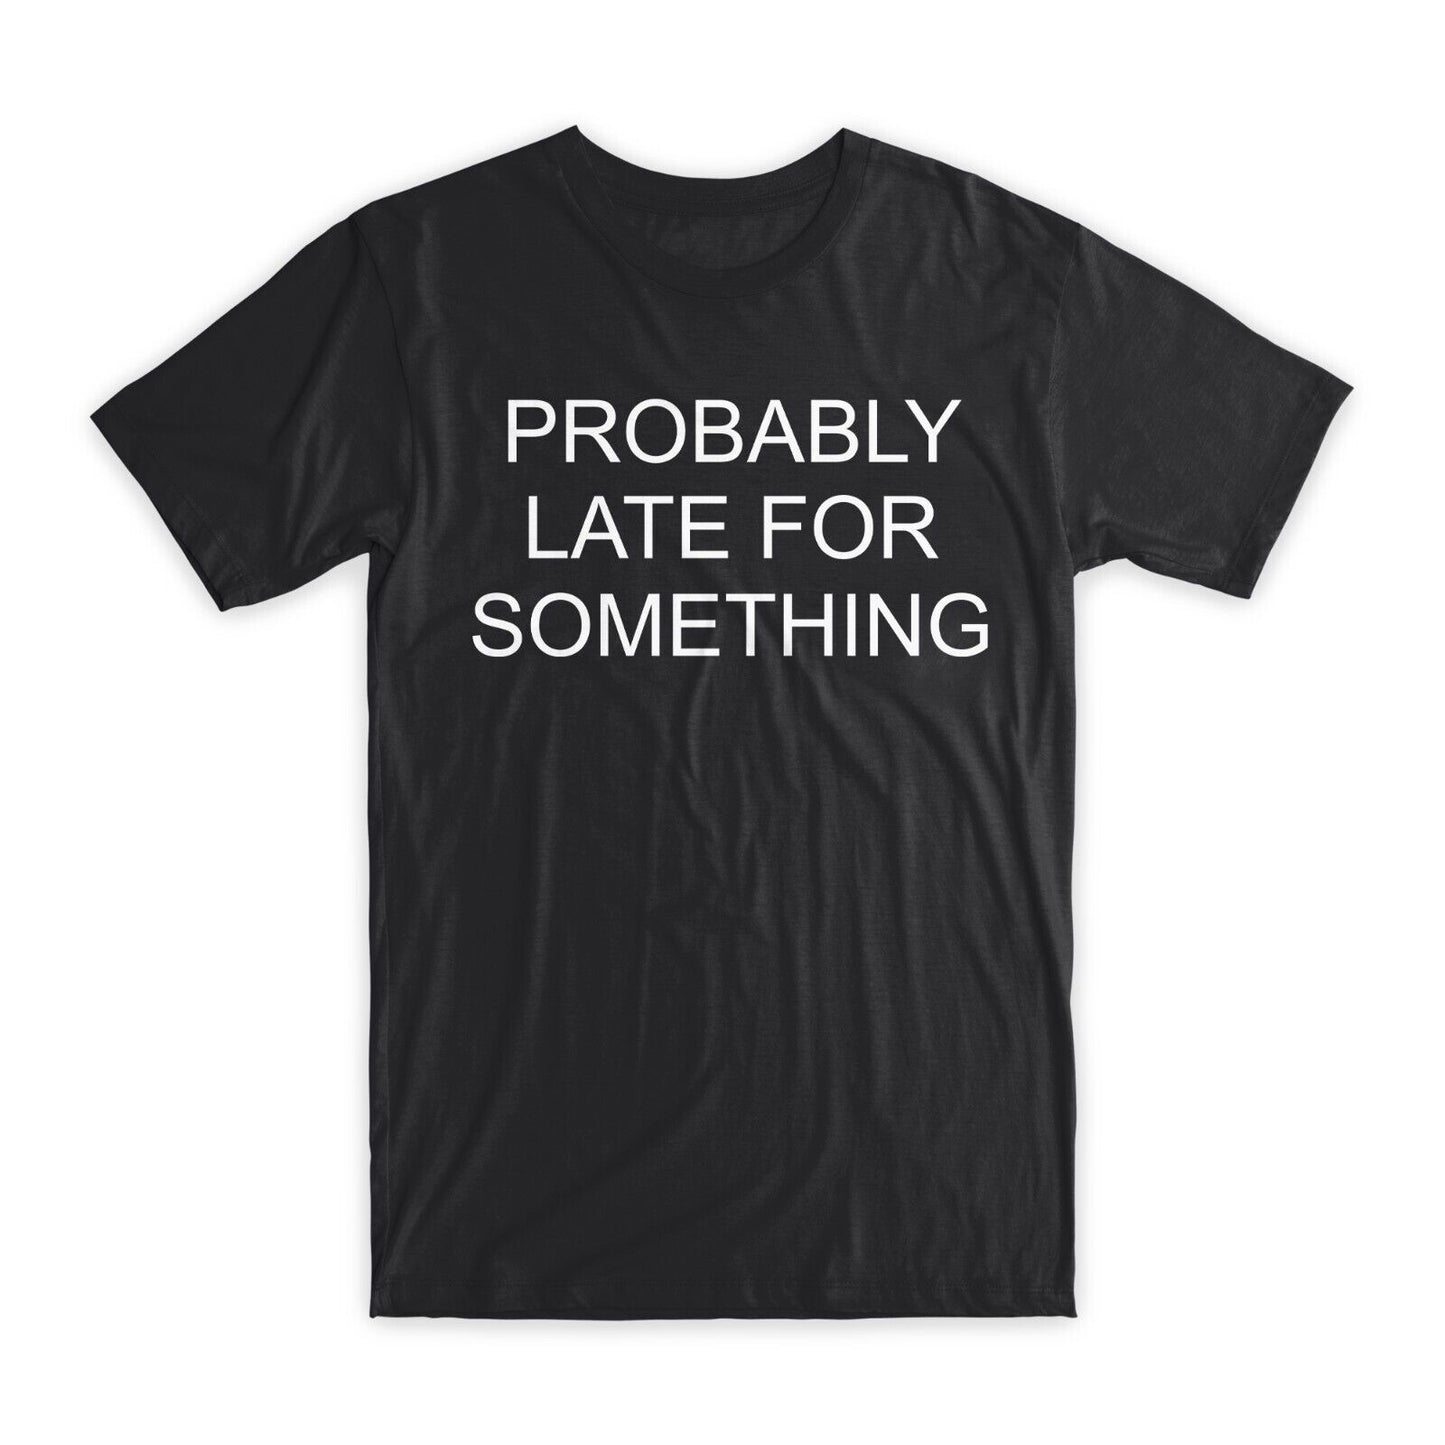 Probably Late for Something T-Shirt Premium Cotton Crew Neck Funny Tees Gift NEW